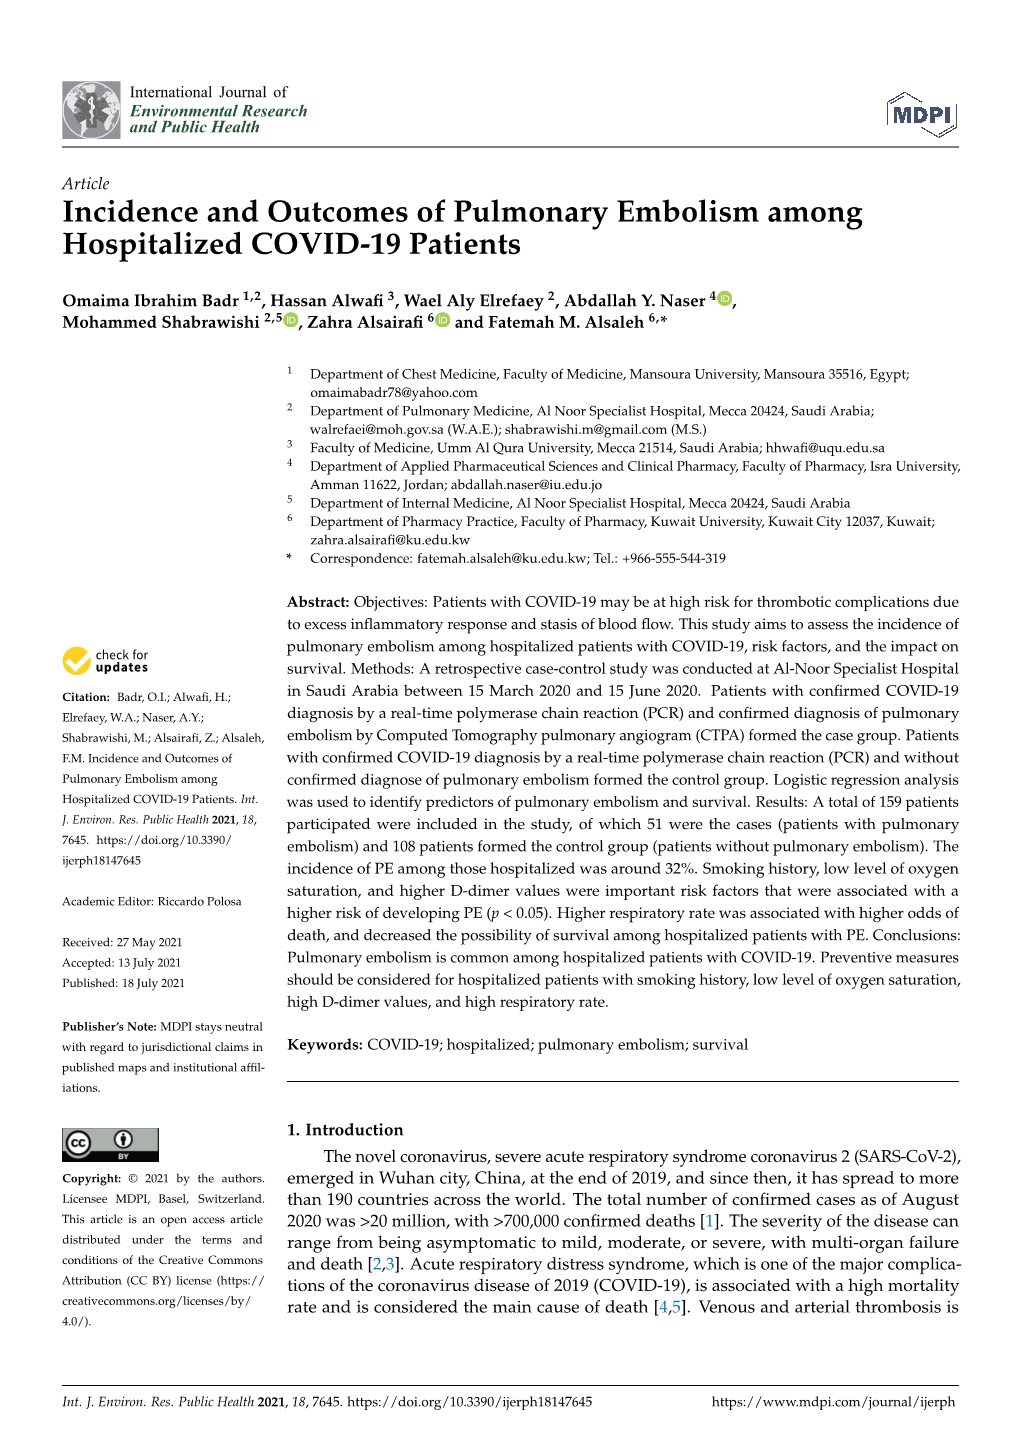 Incidence and Outcomes of Pulmonary Embolism Among Hospitalized COVID-19 Patients